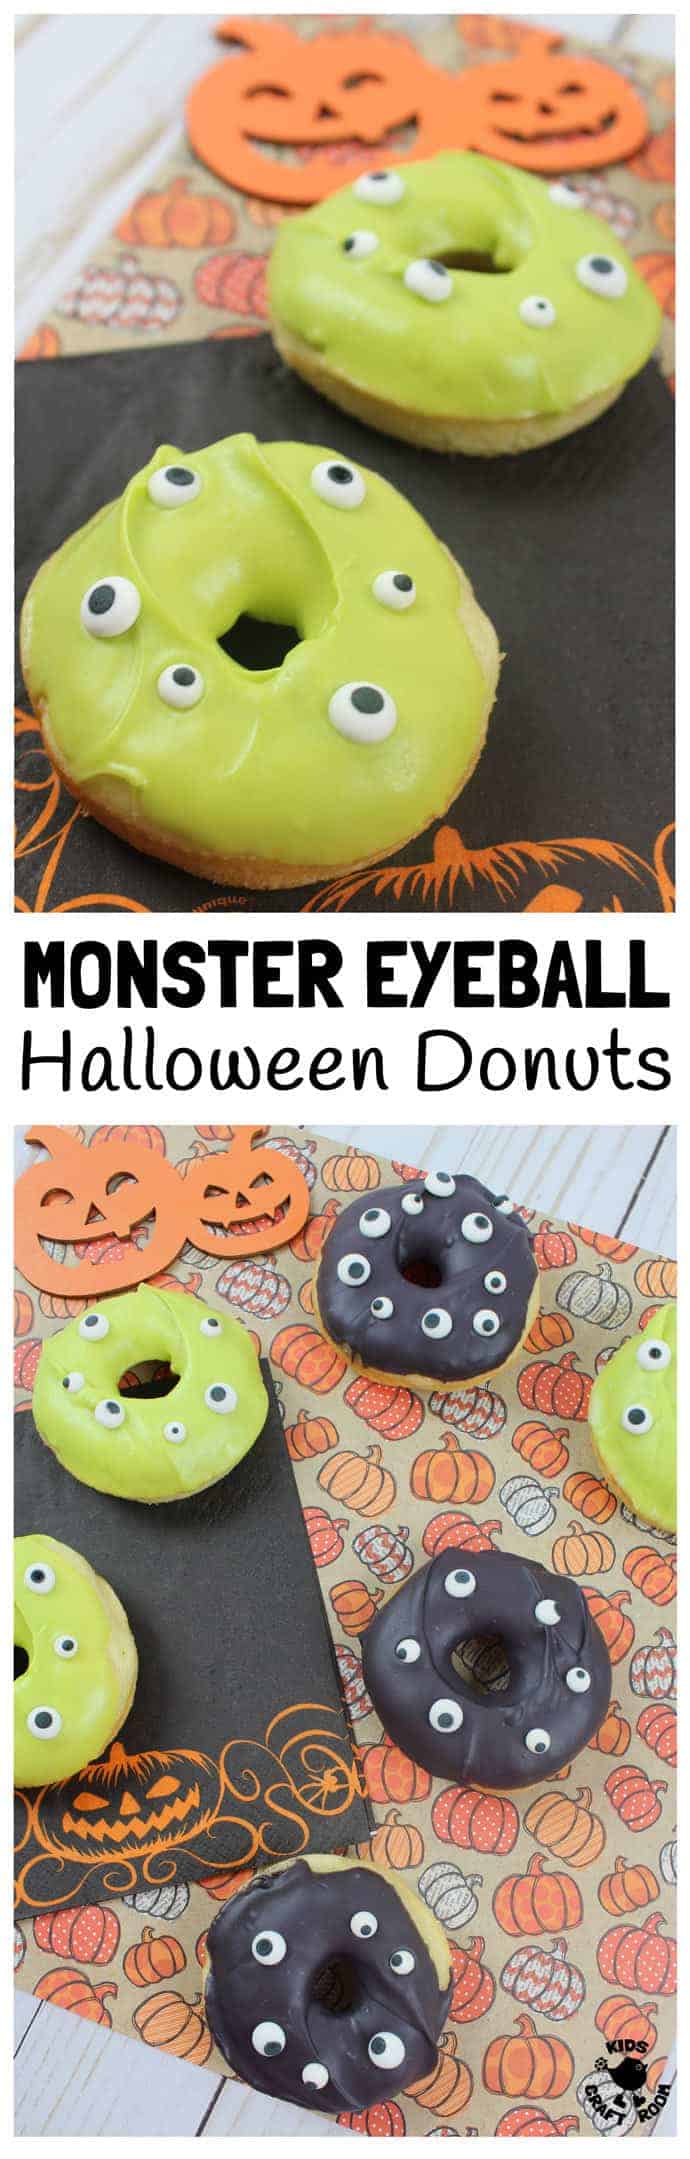 A collage of Creepy Monster Eyeball Halloween Donuts.